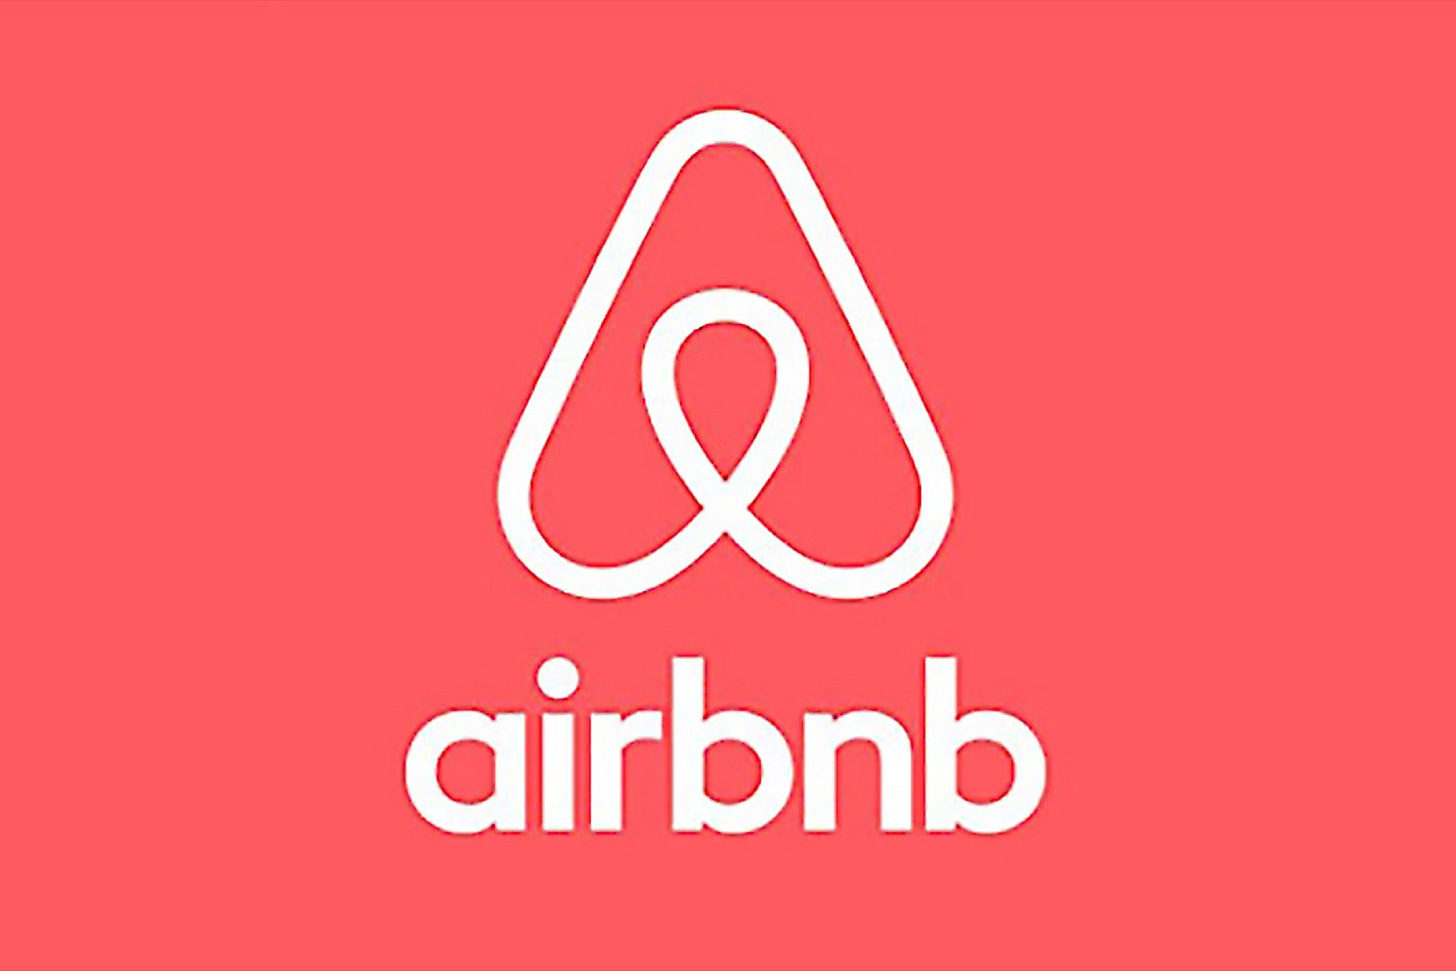 Airbnb, Why the New Logo?